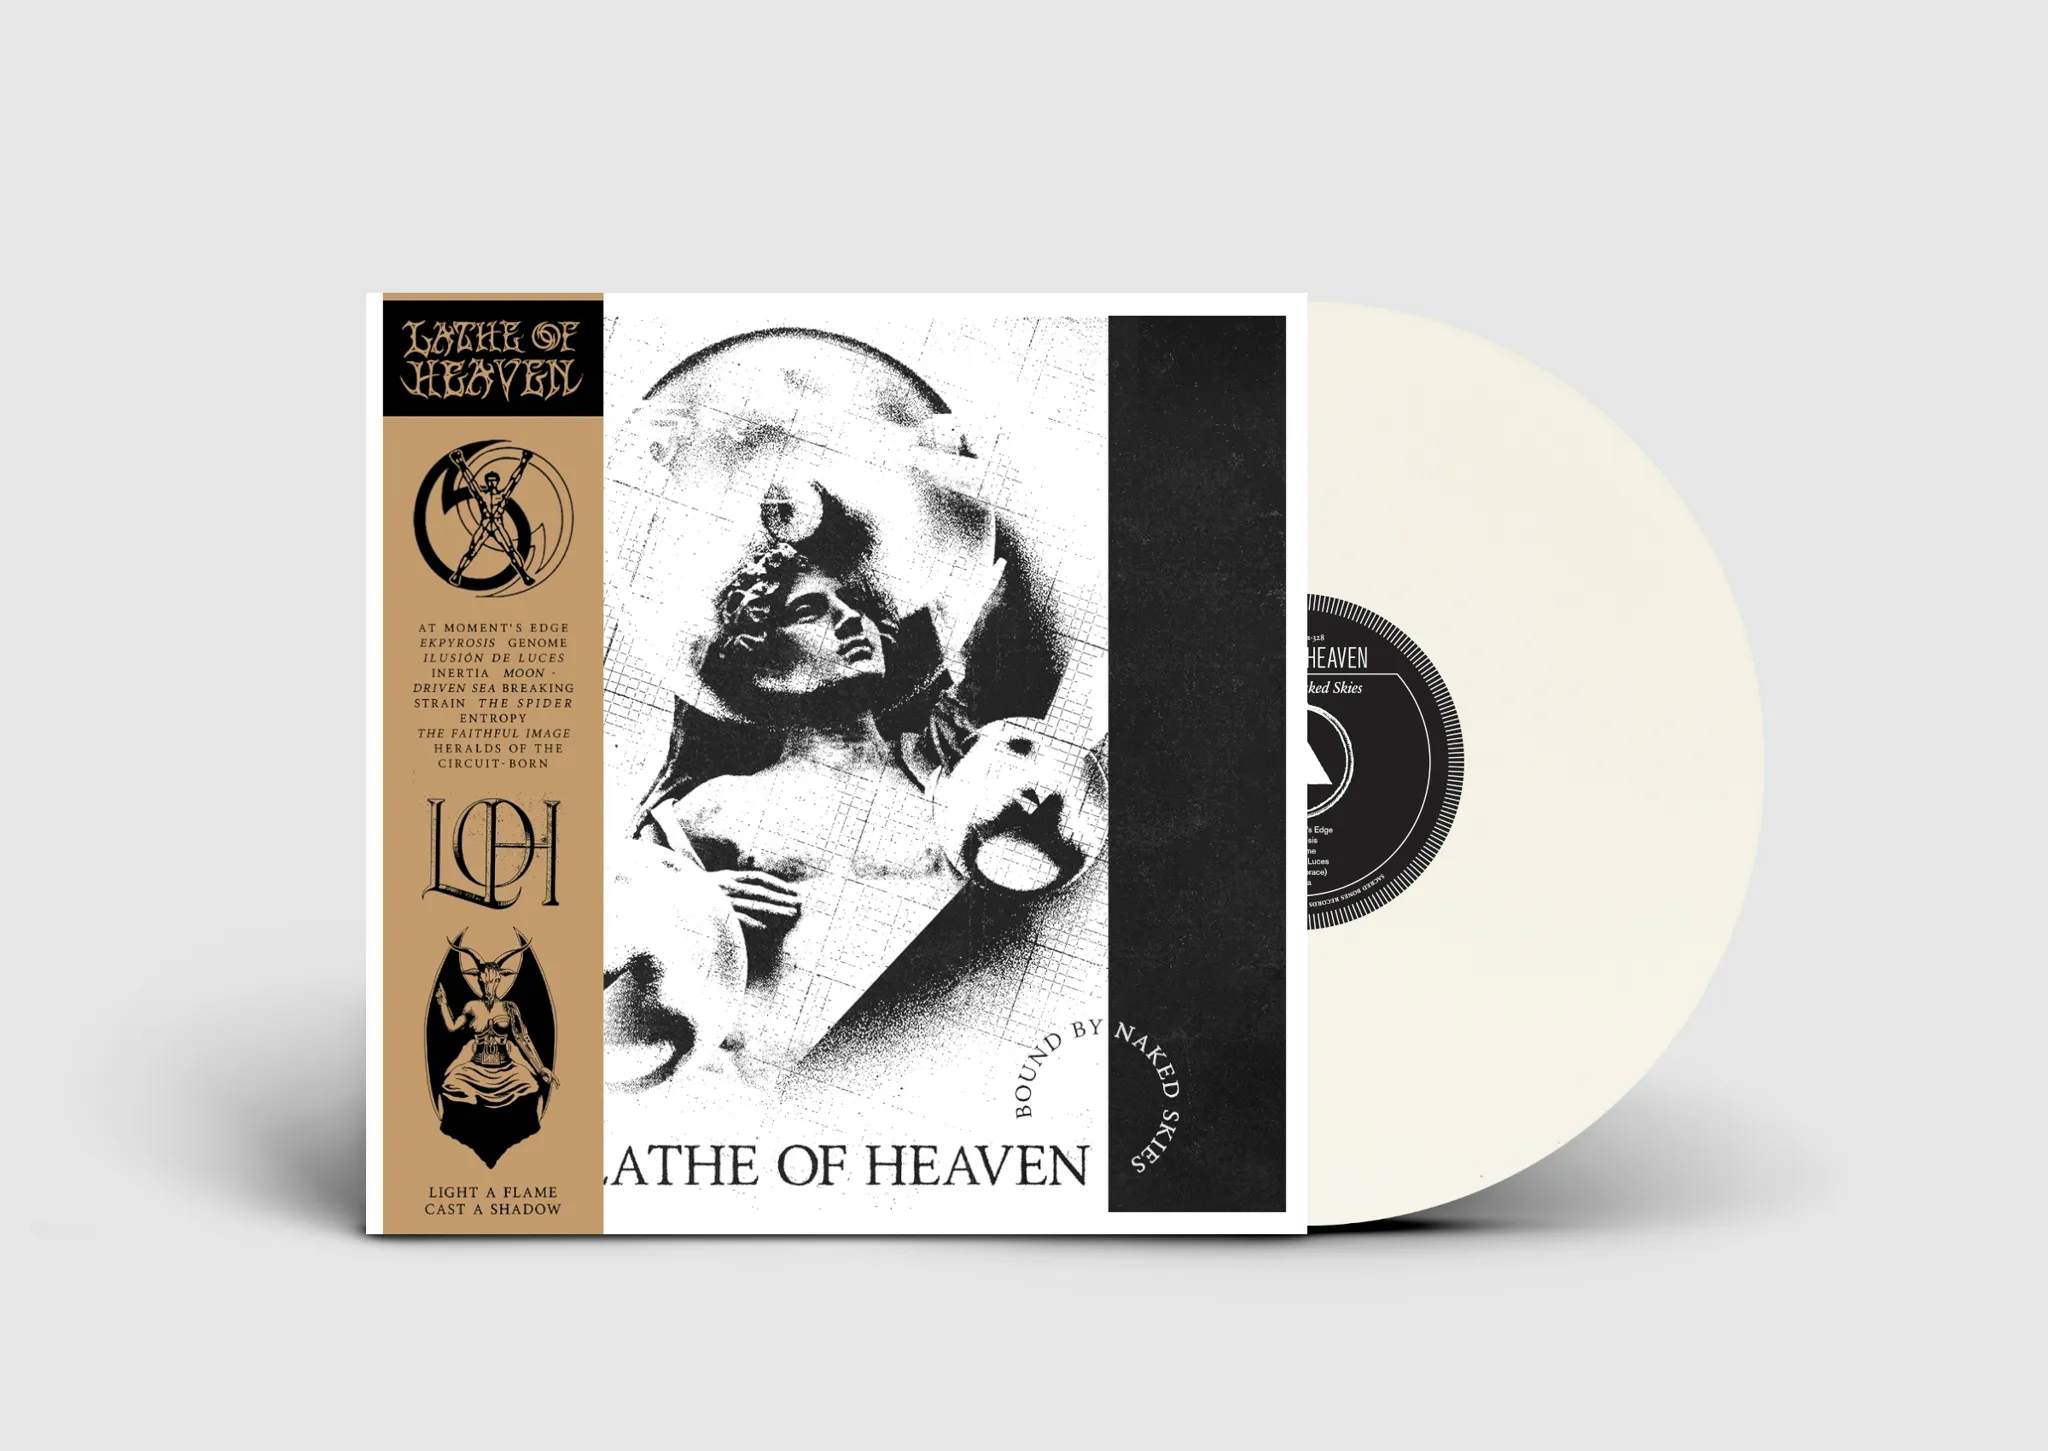 Album artwork for Album artwork for Bound By Naked Skies by  Lathe Of Heaven  by Bound By Naked Skies -  Lathe Of Heaven 